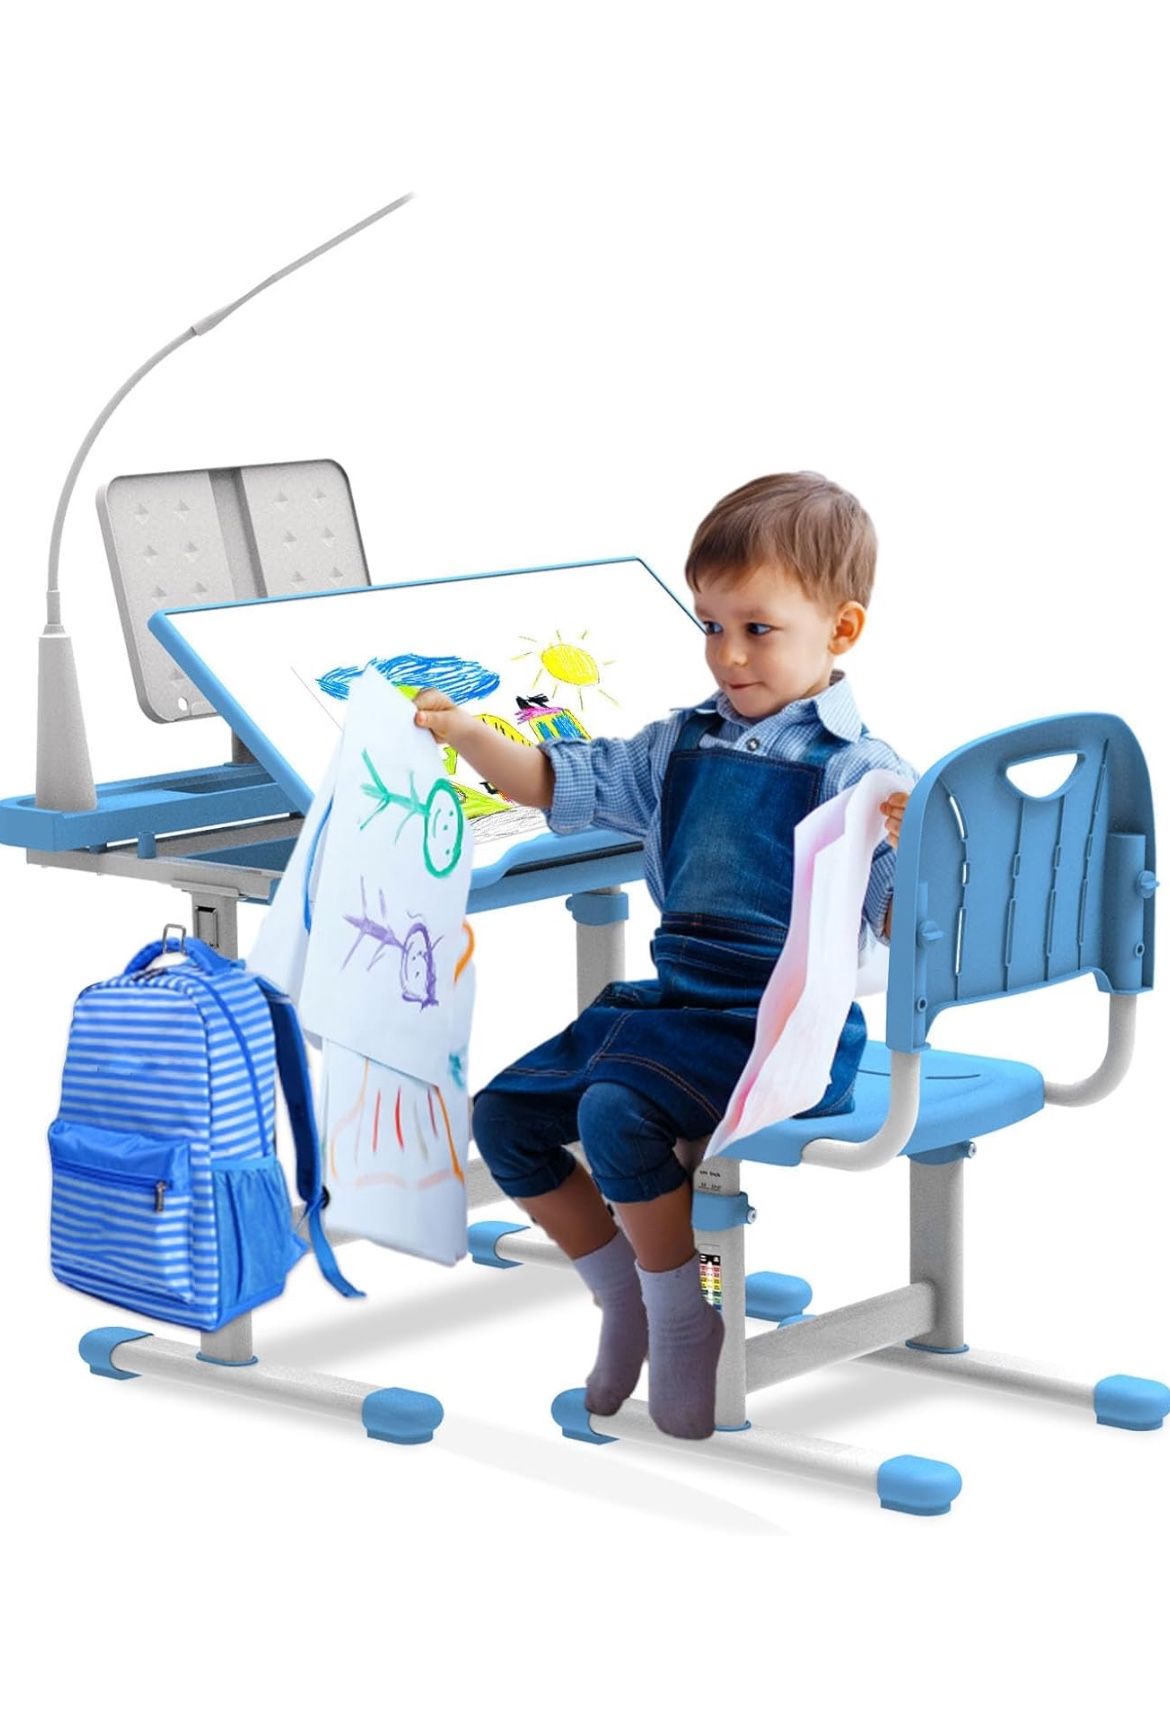 Kids Desk and Chair adjustable, NEW